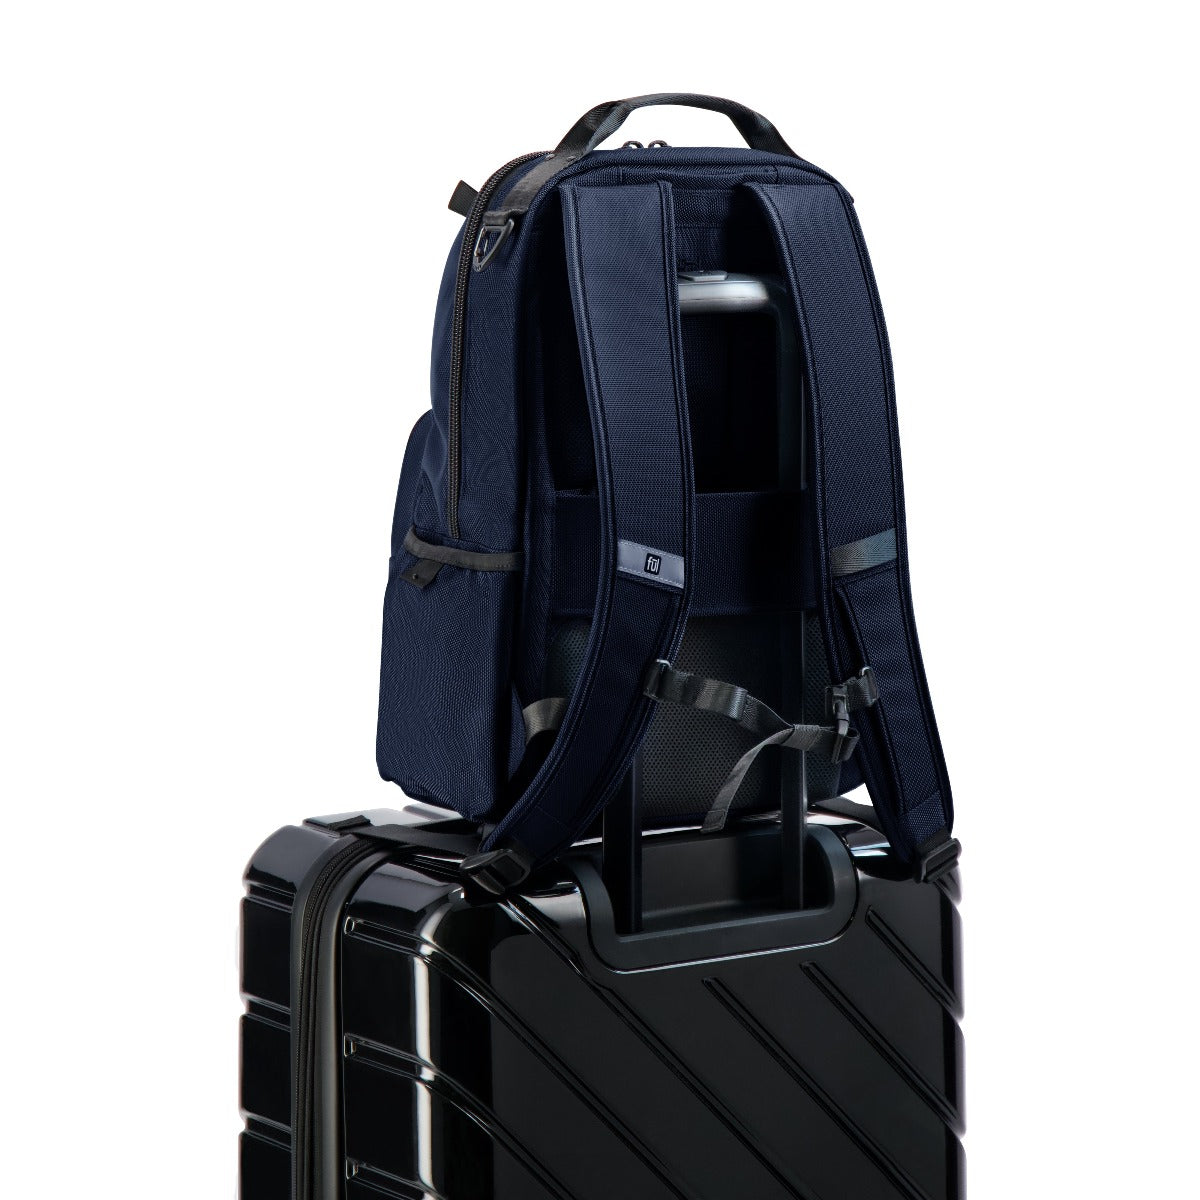 ful tactics collection phantom backpack navy blue - carry-on tech backpacks